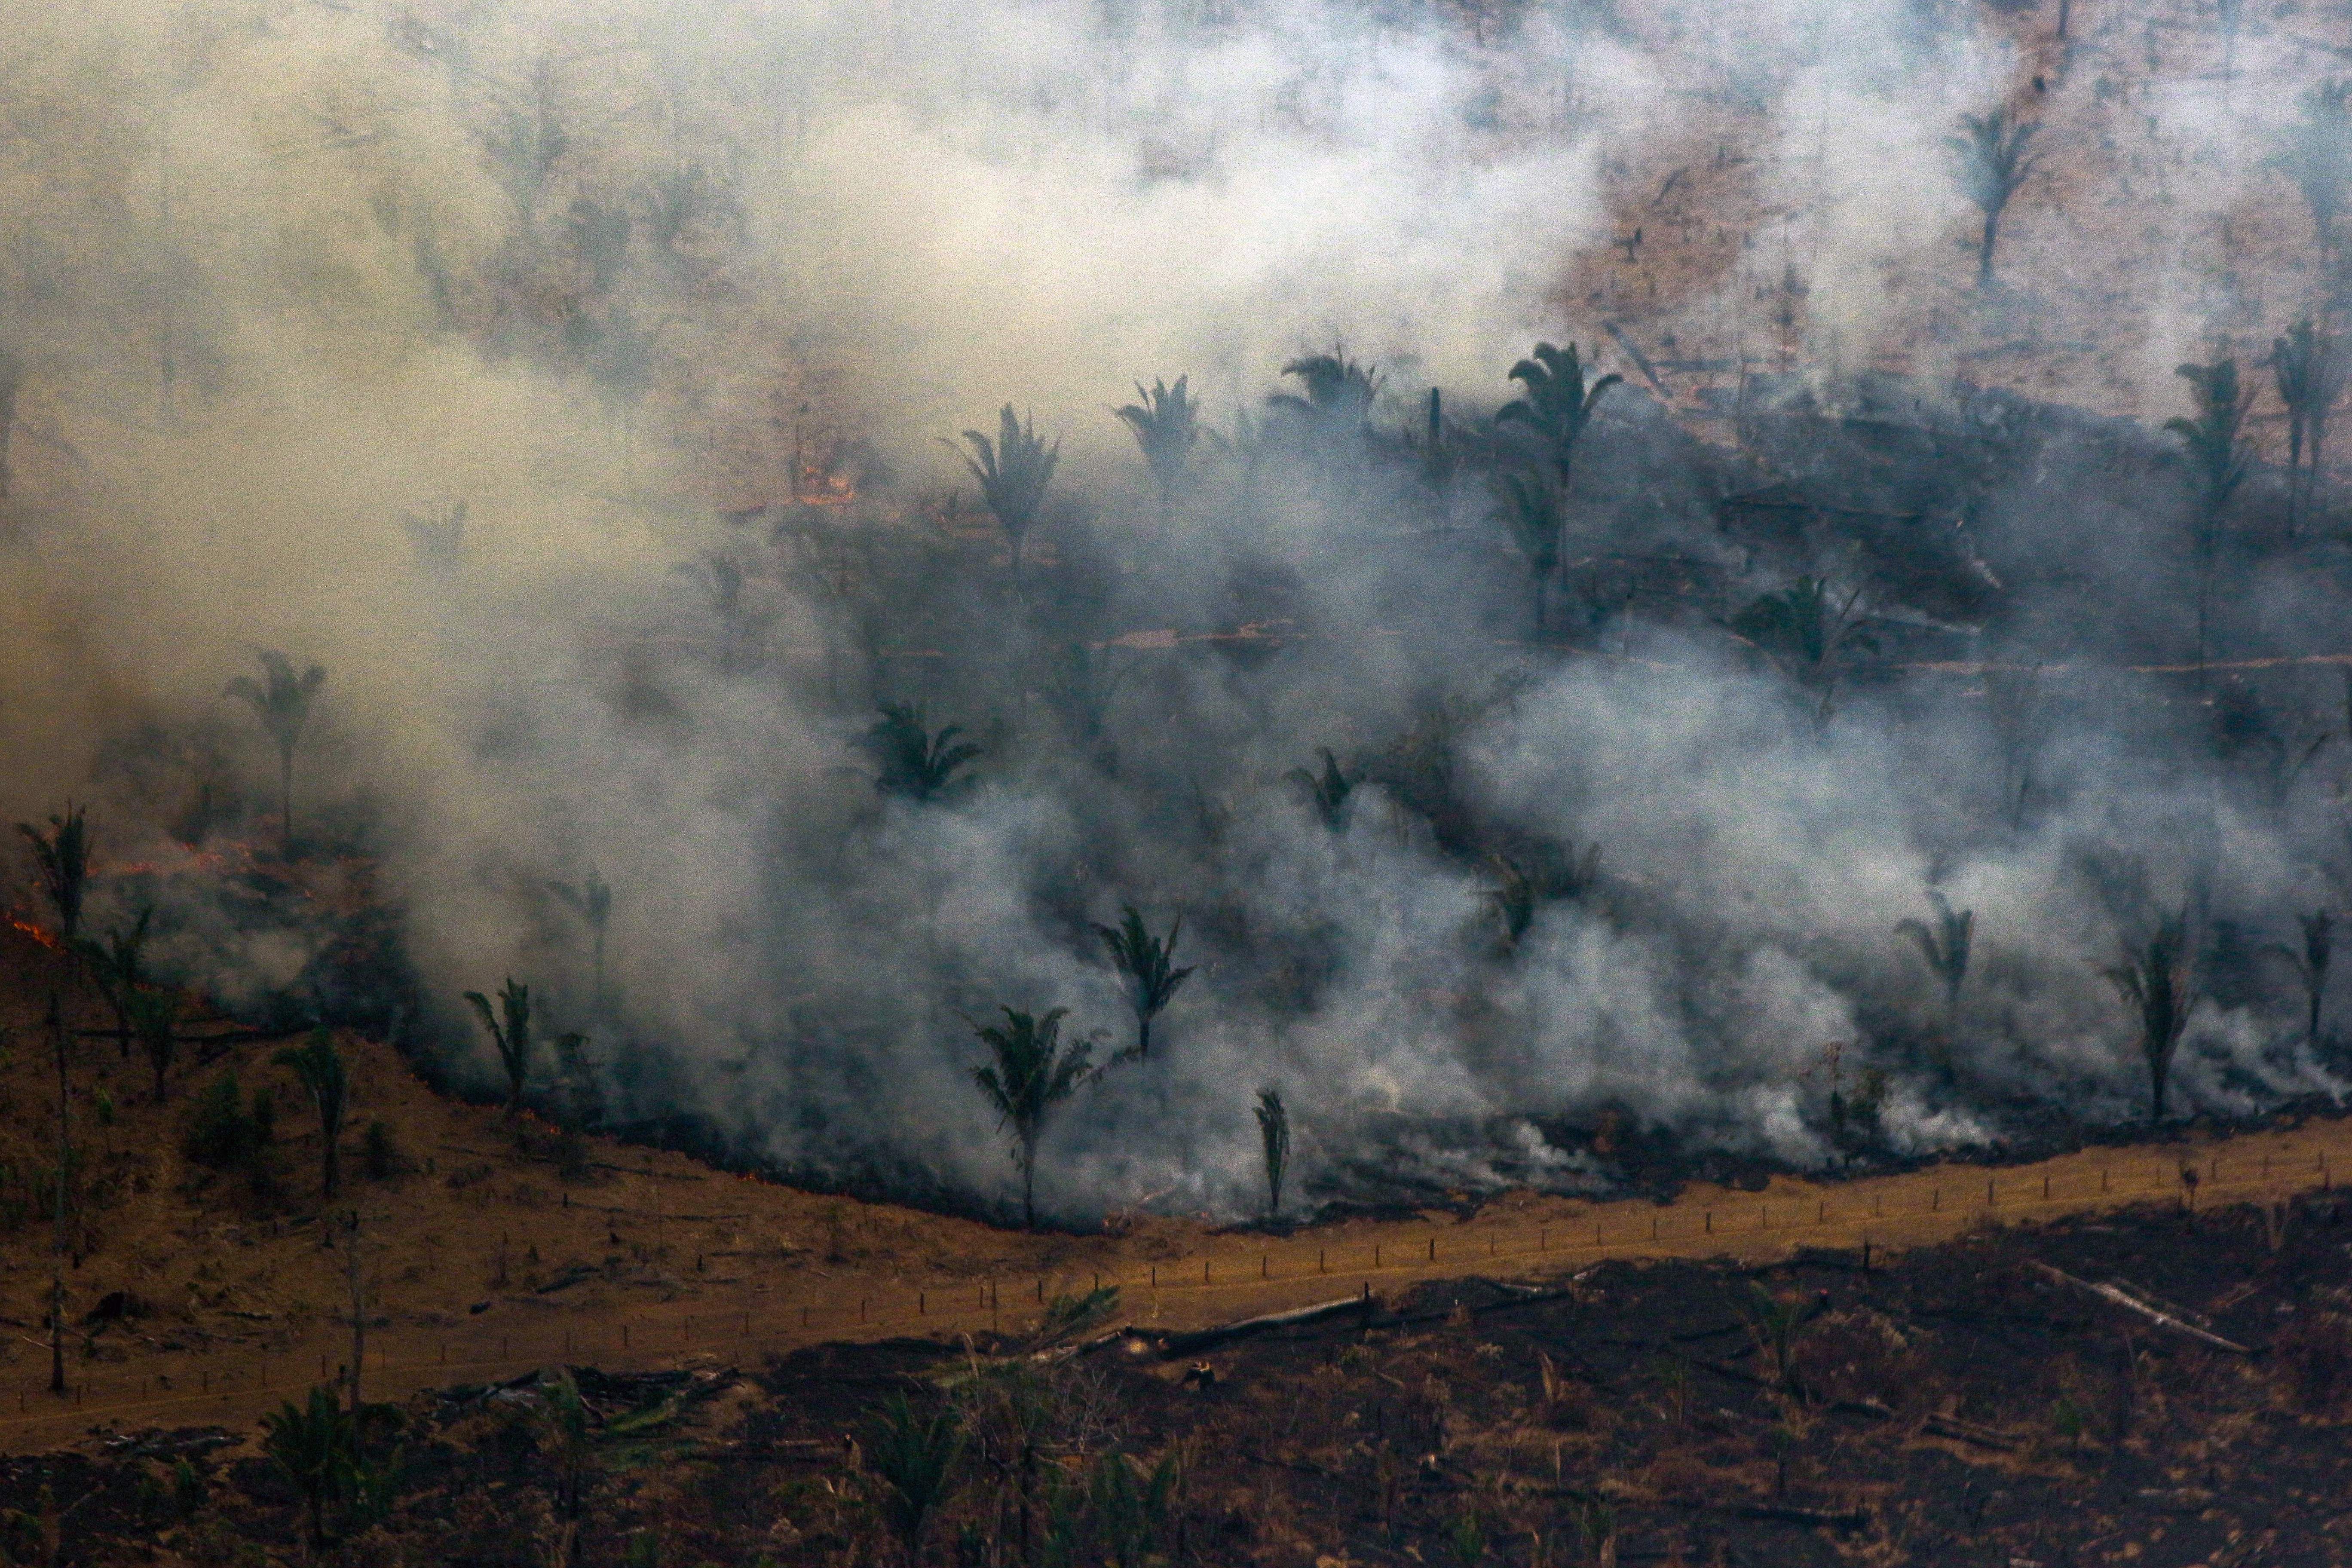 Amazon fires: Impact on rainforest in and around Brazil — in photos